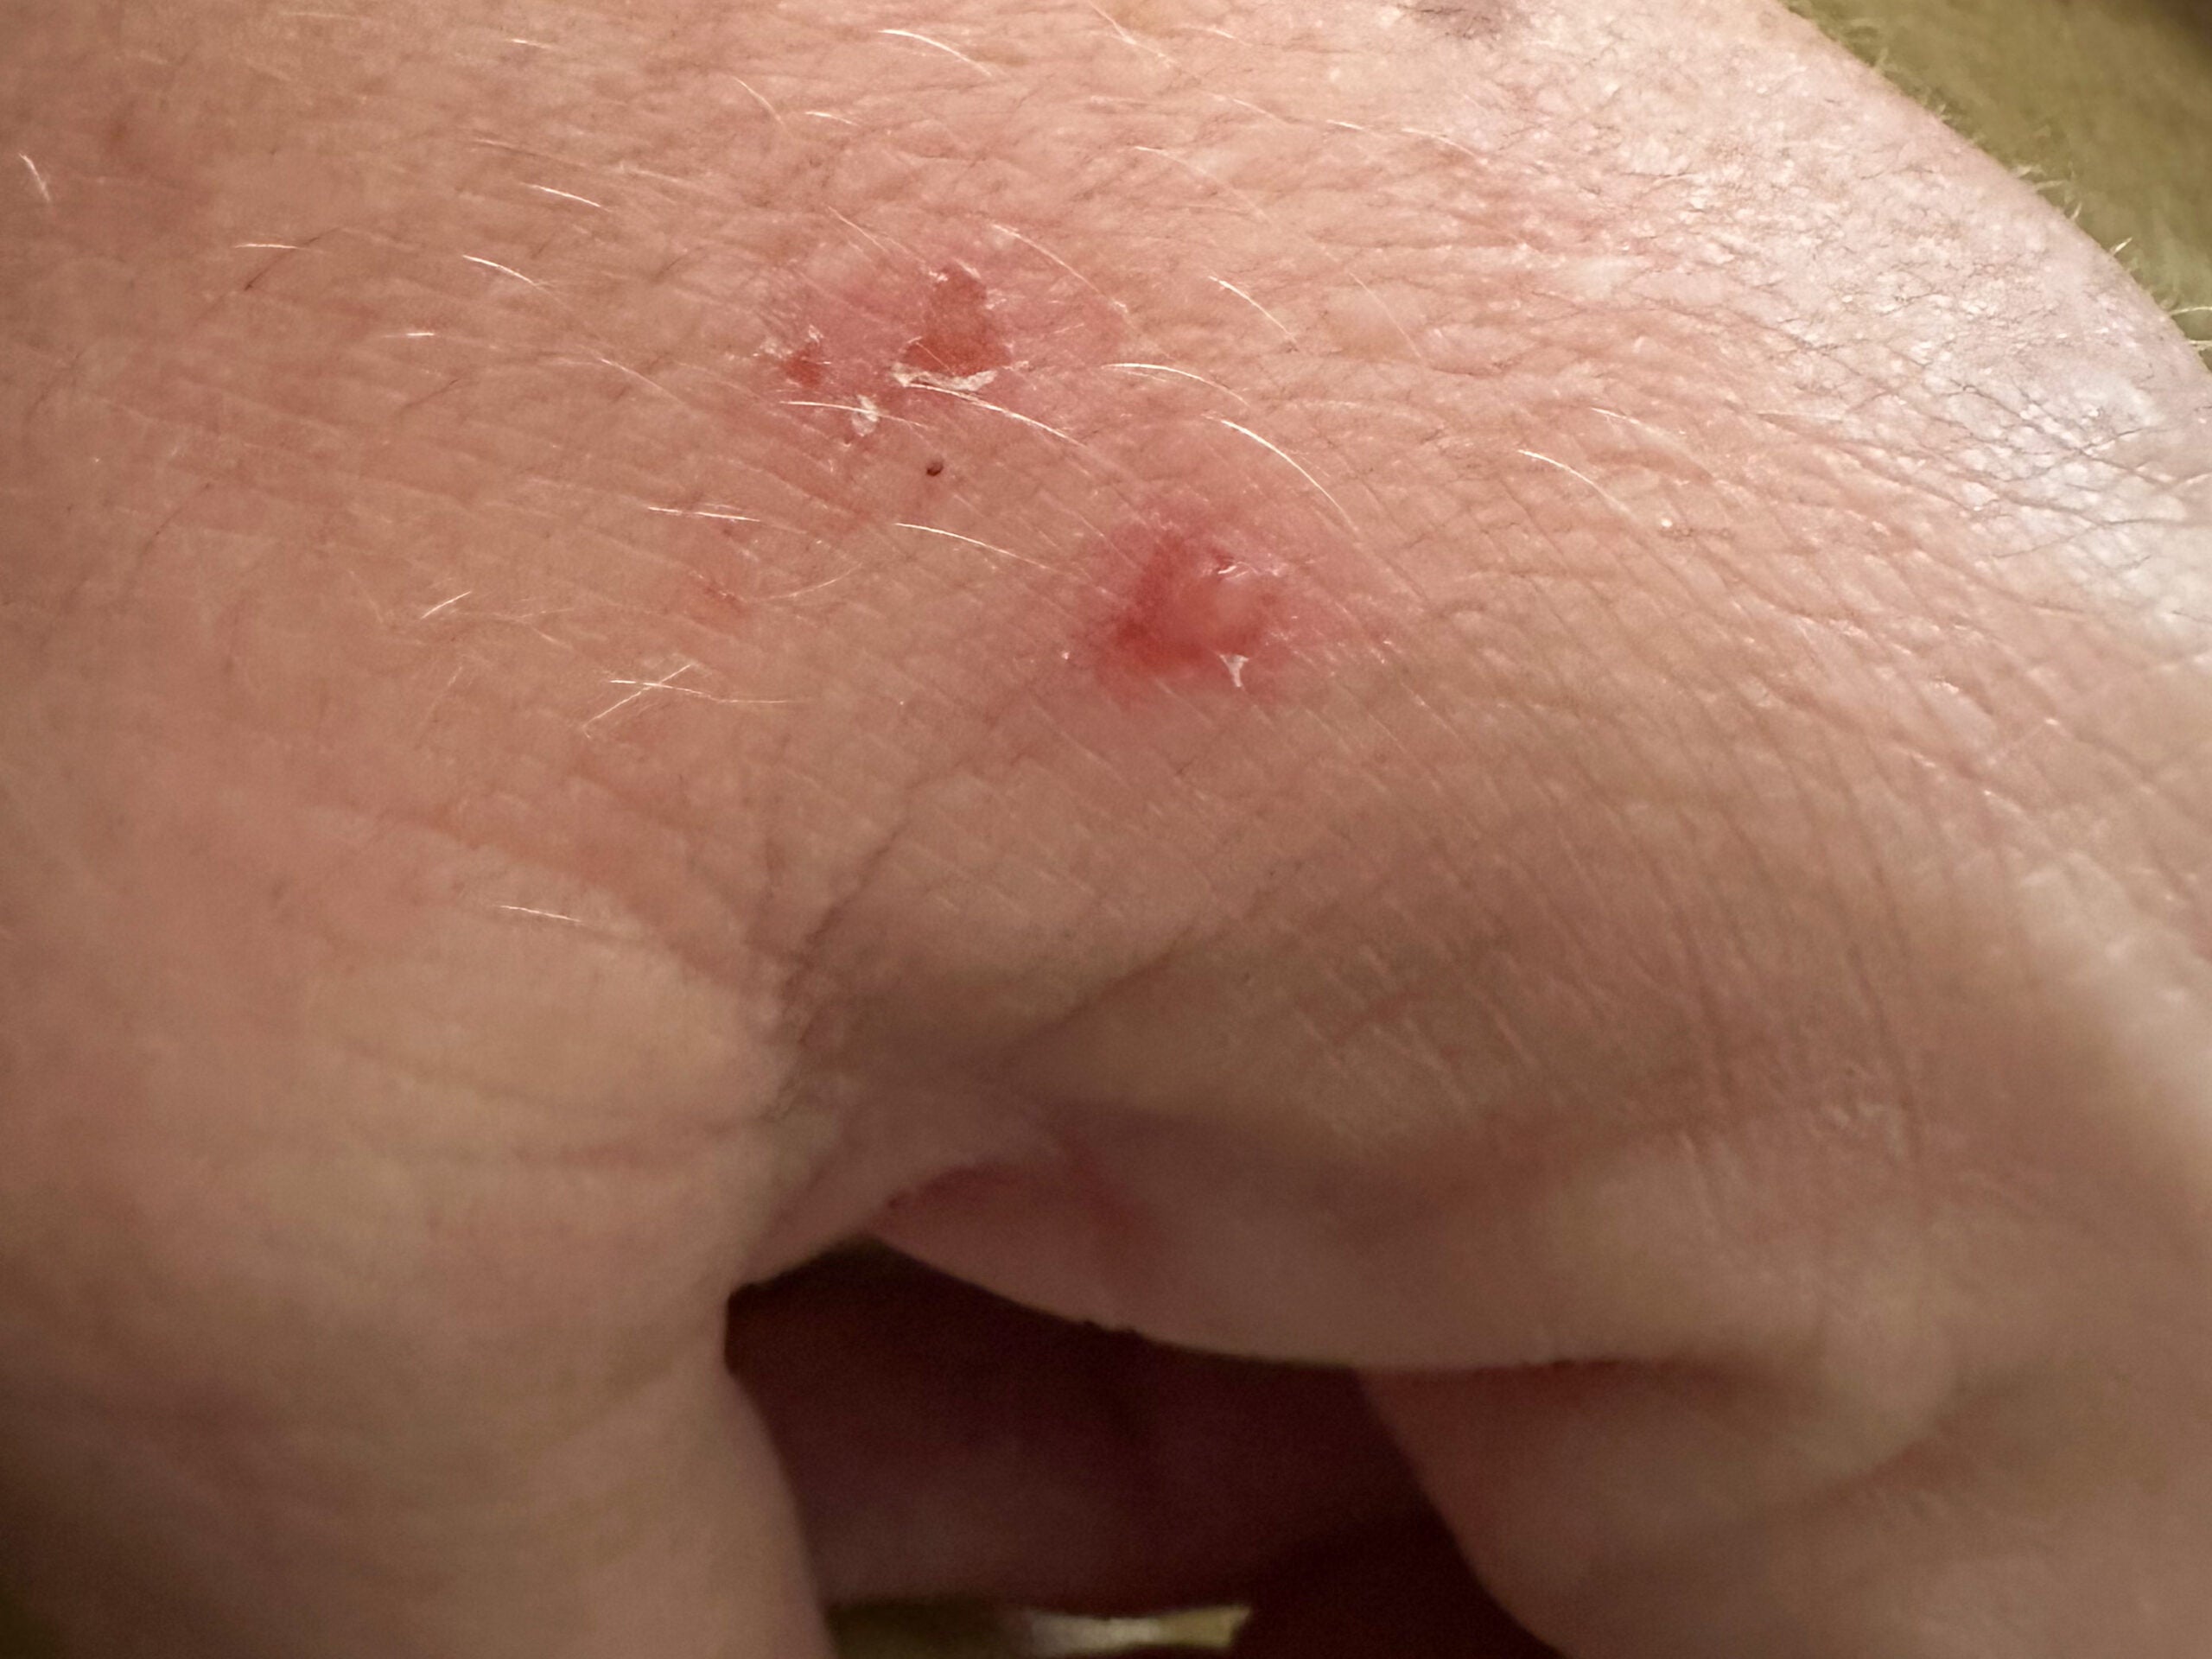 chigger bites on a person's hand